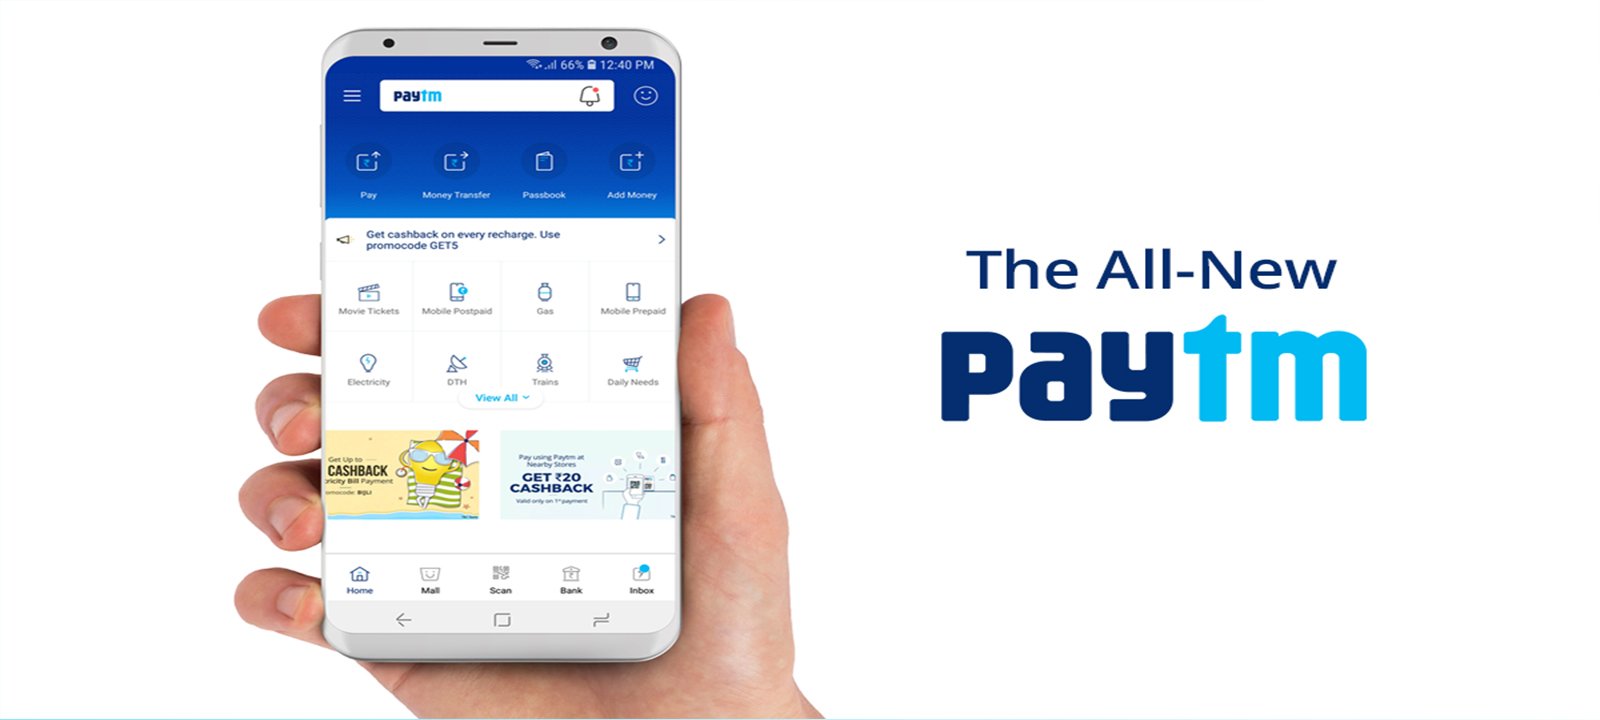 Major Things to Consider before Developing PaytmLike App